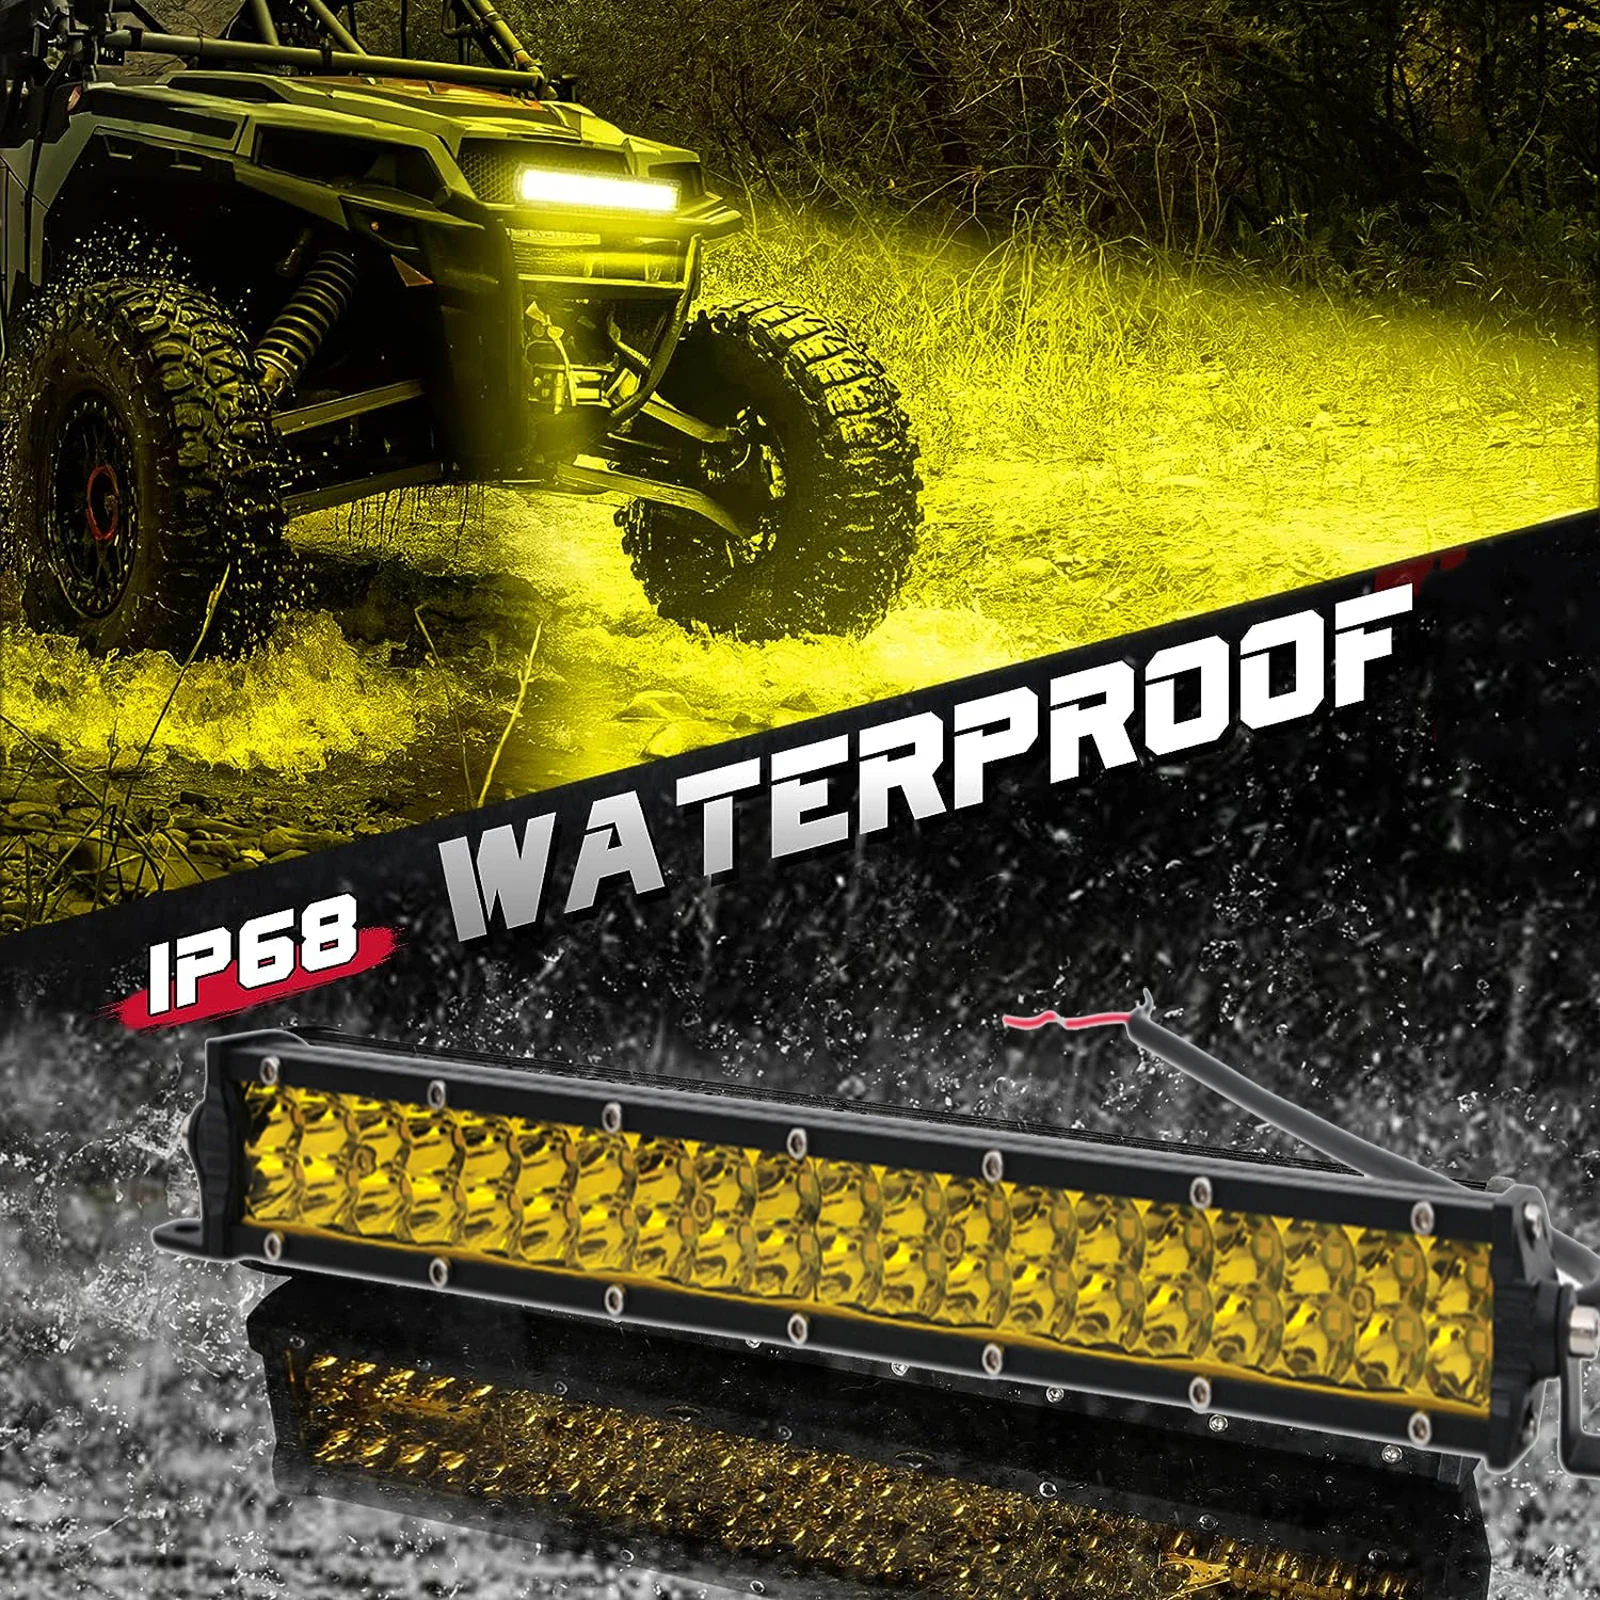 

Yellow Dual Row 7" inch Led Light Bar 60W For Car Tractor SUV Truck Boat 4WD 4x4 Offroad ATV UTV Led Work Light Driving Fog Lamp